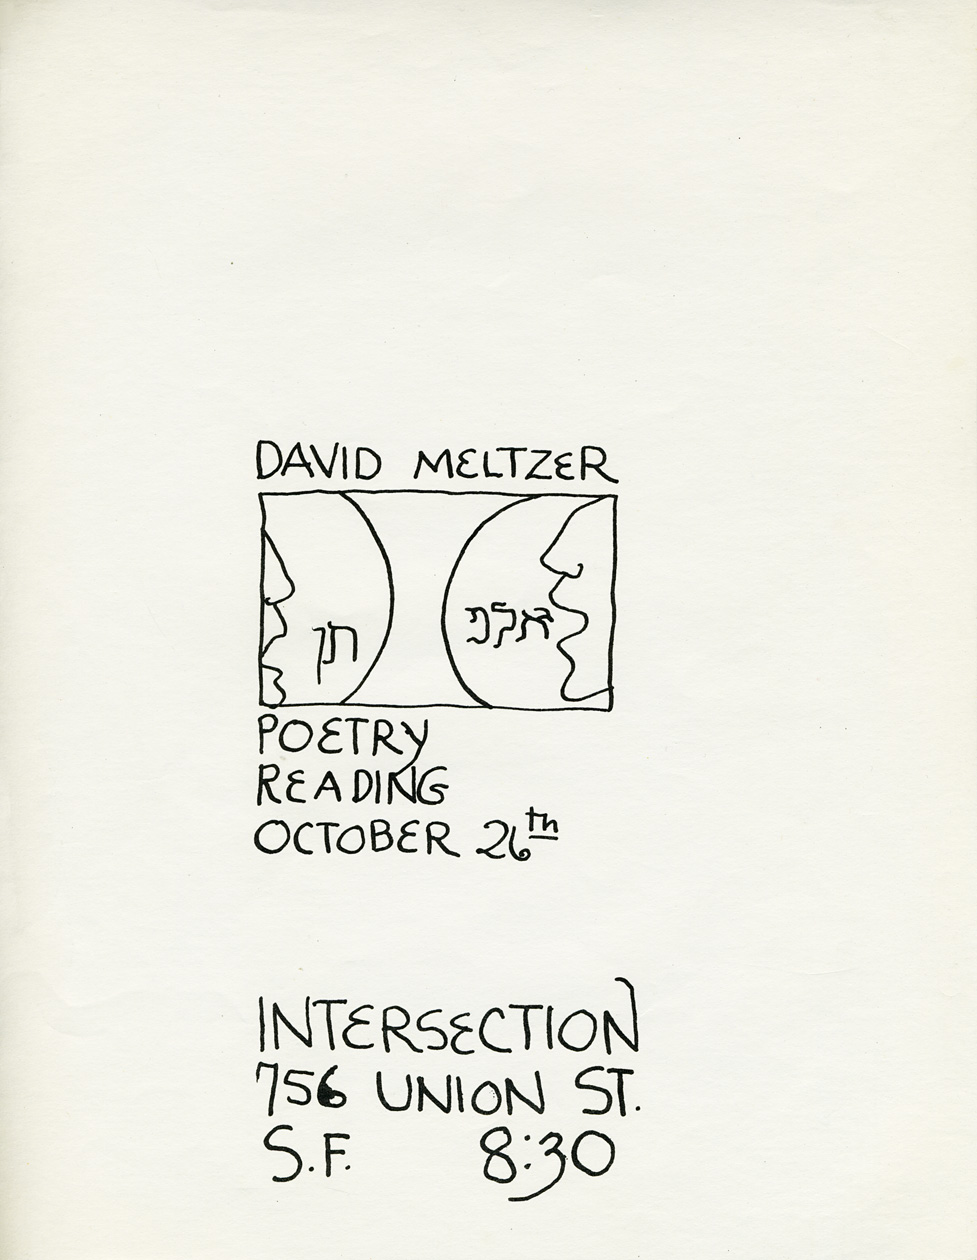 Flyer for a reading by David Meltzer at Intersection for the Arts, San Francisco, October 26, 1971. Intersection’s poetry reading series was coordinated by Lewis Warsh in 1971. 8 1/2 x 11 inches.